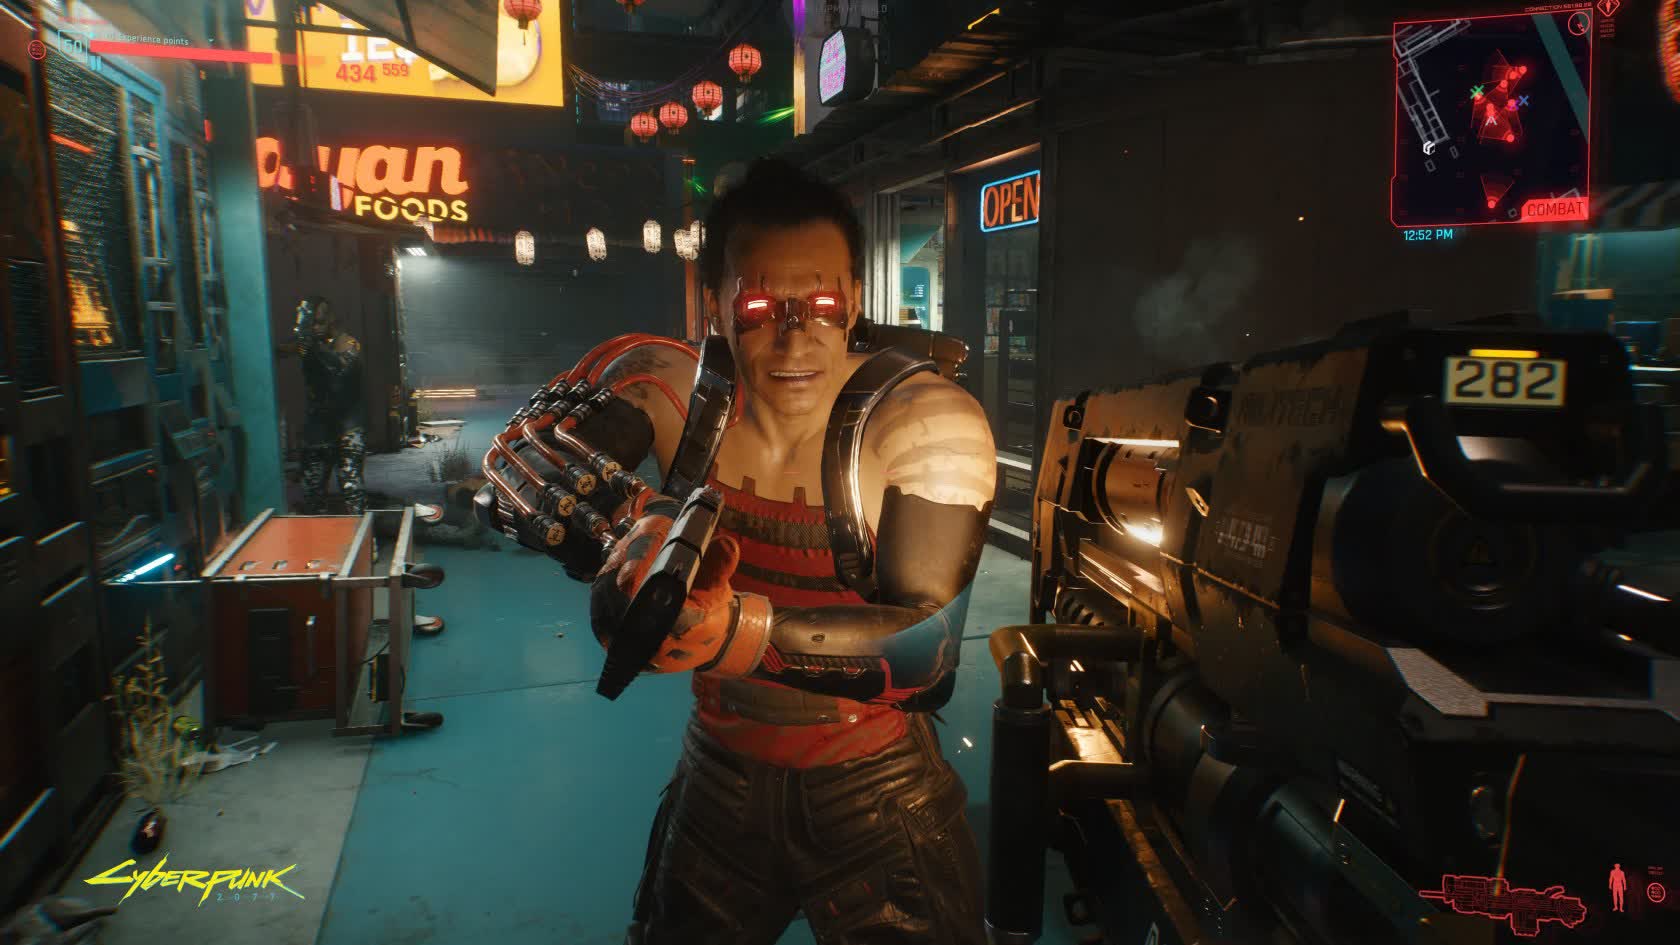 Cyberpunk 2077's main story will be 'slightly shorter' than The Witcher 3's